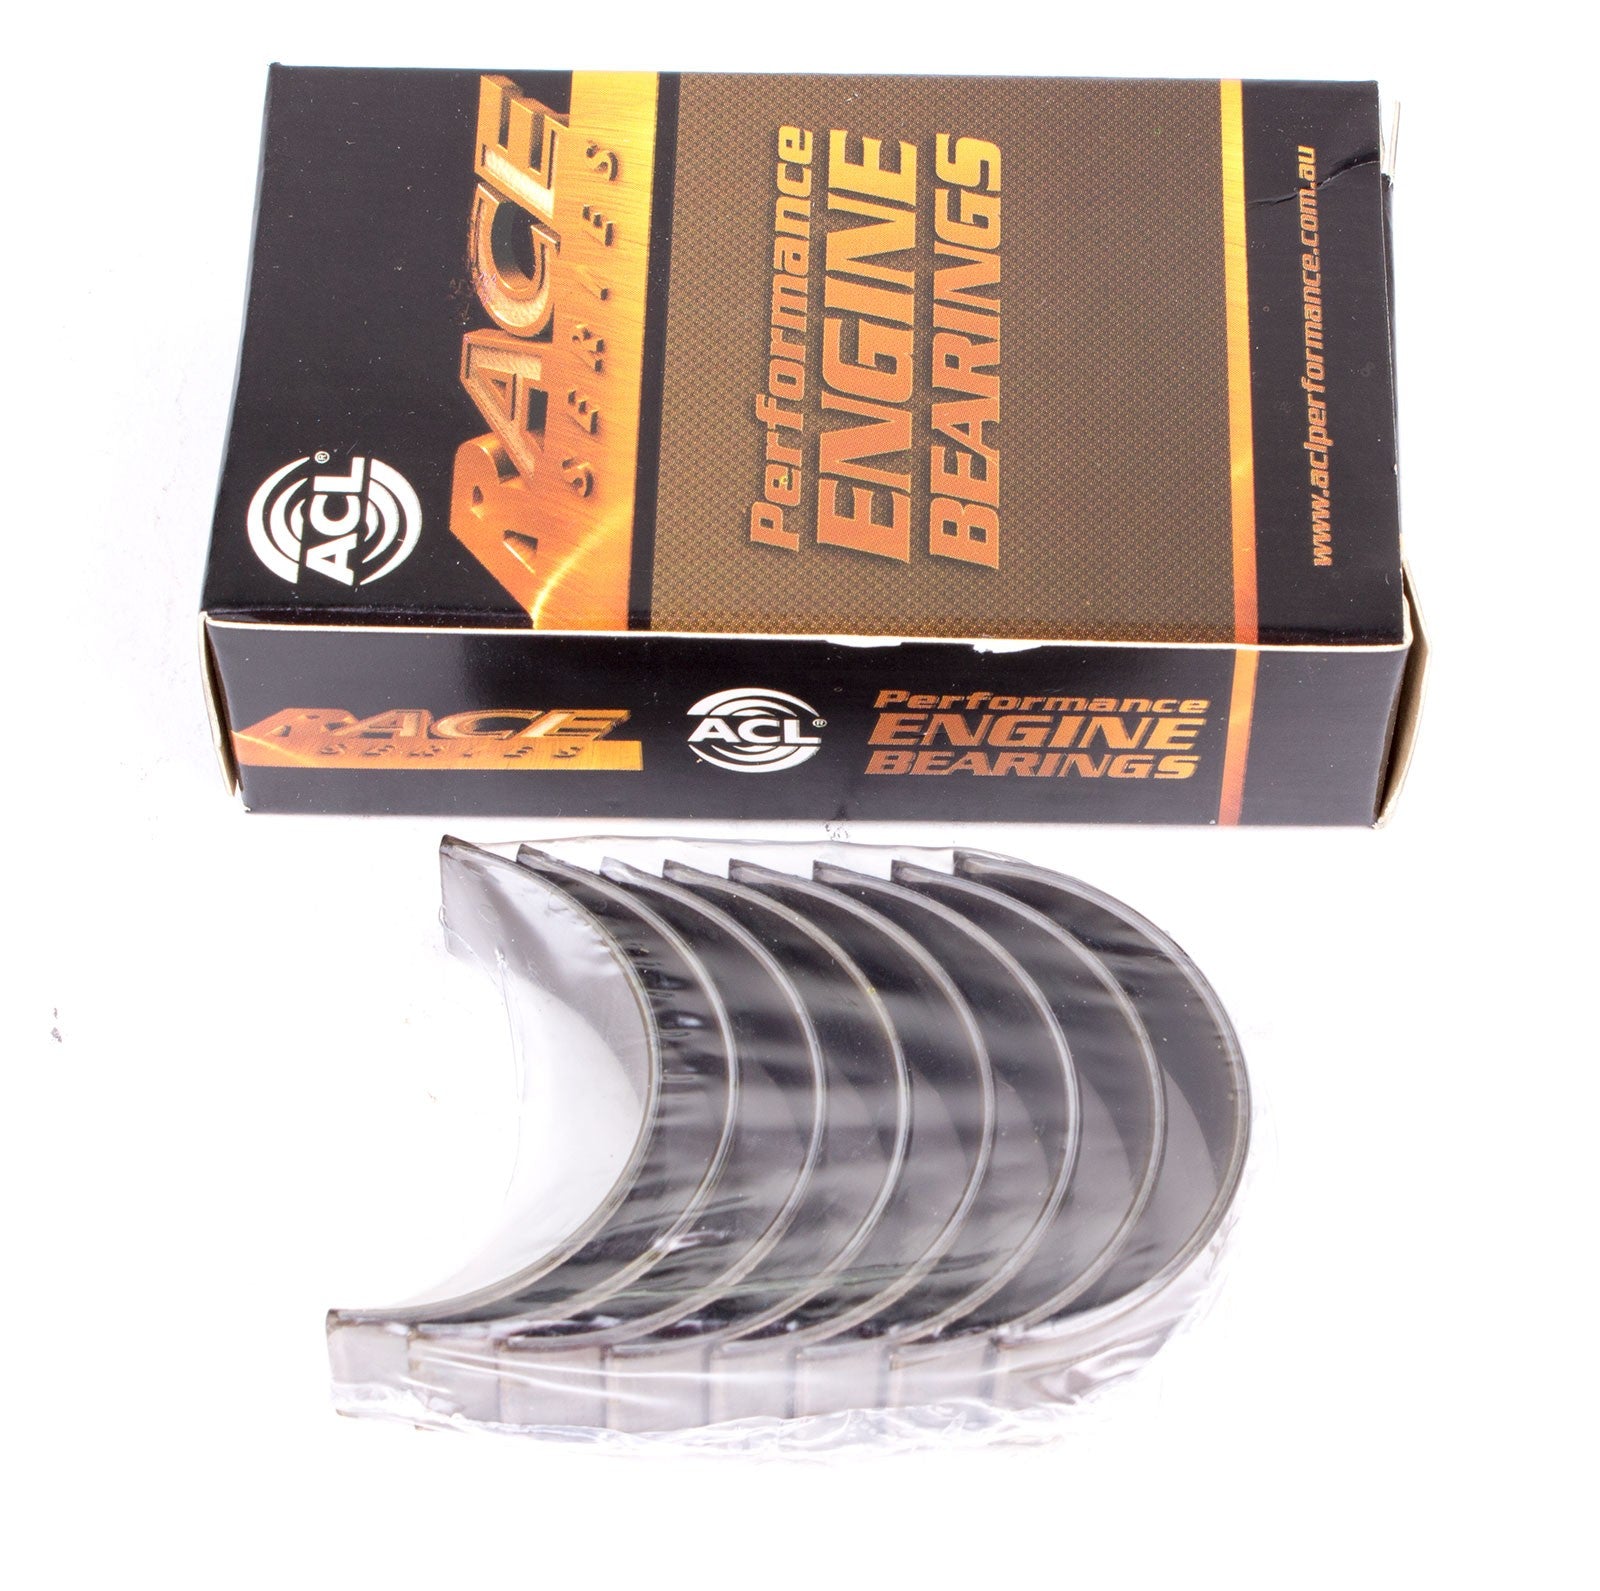 ACL 5M590H-11 Main bearing set (ACL Race Series) Photo-0 